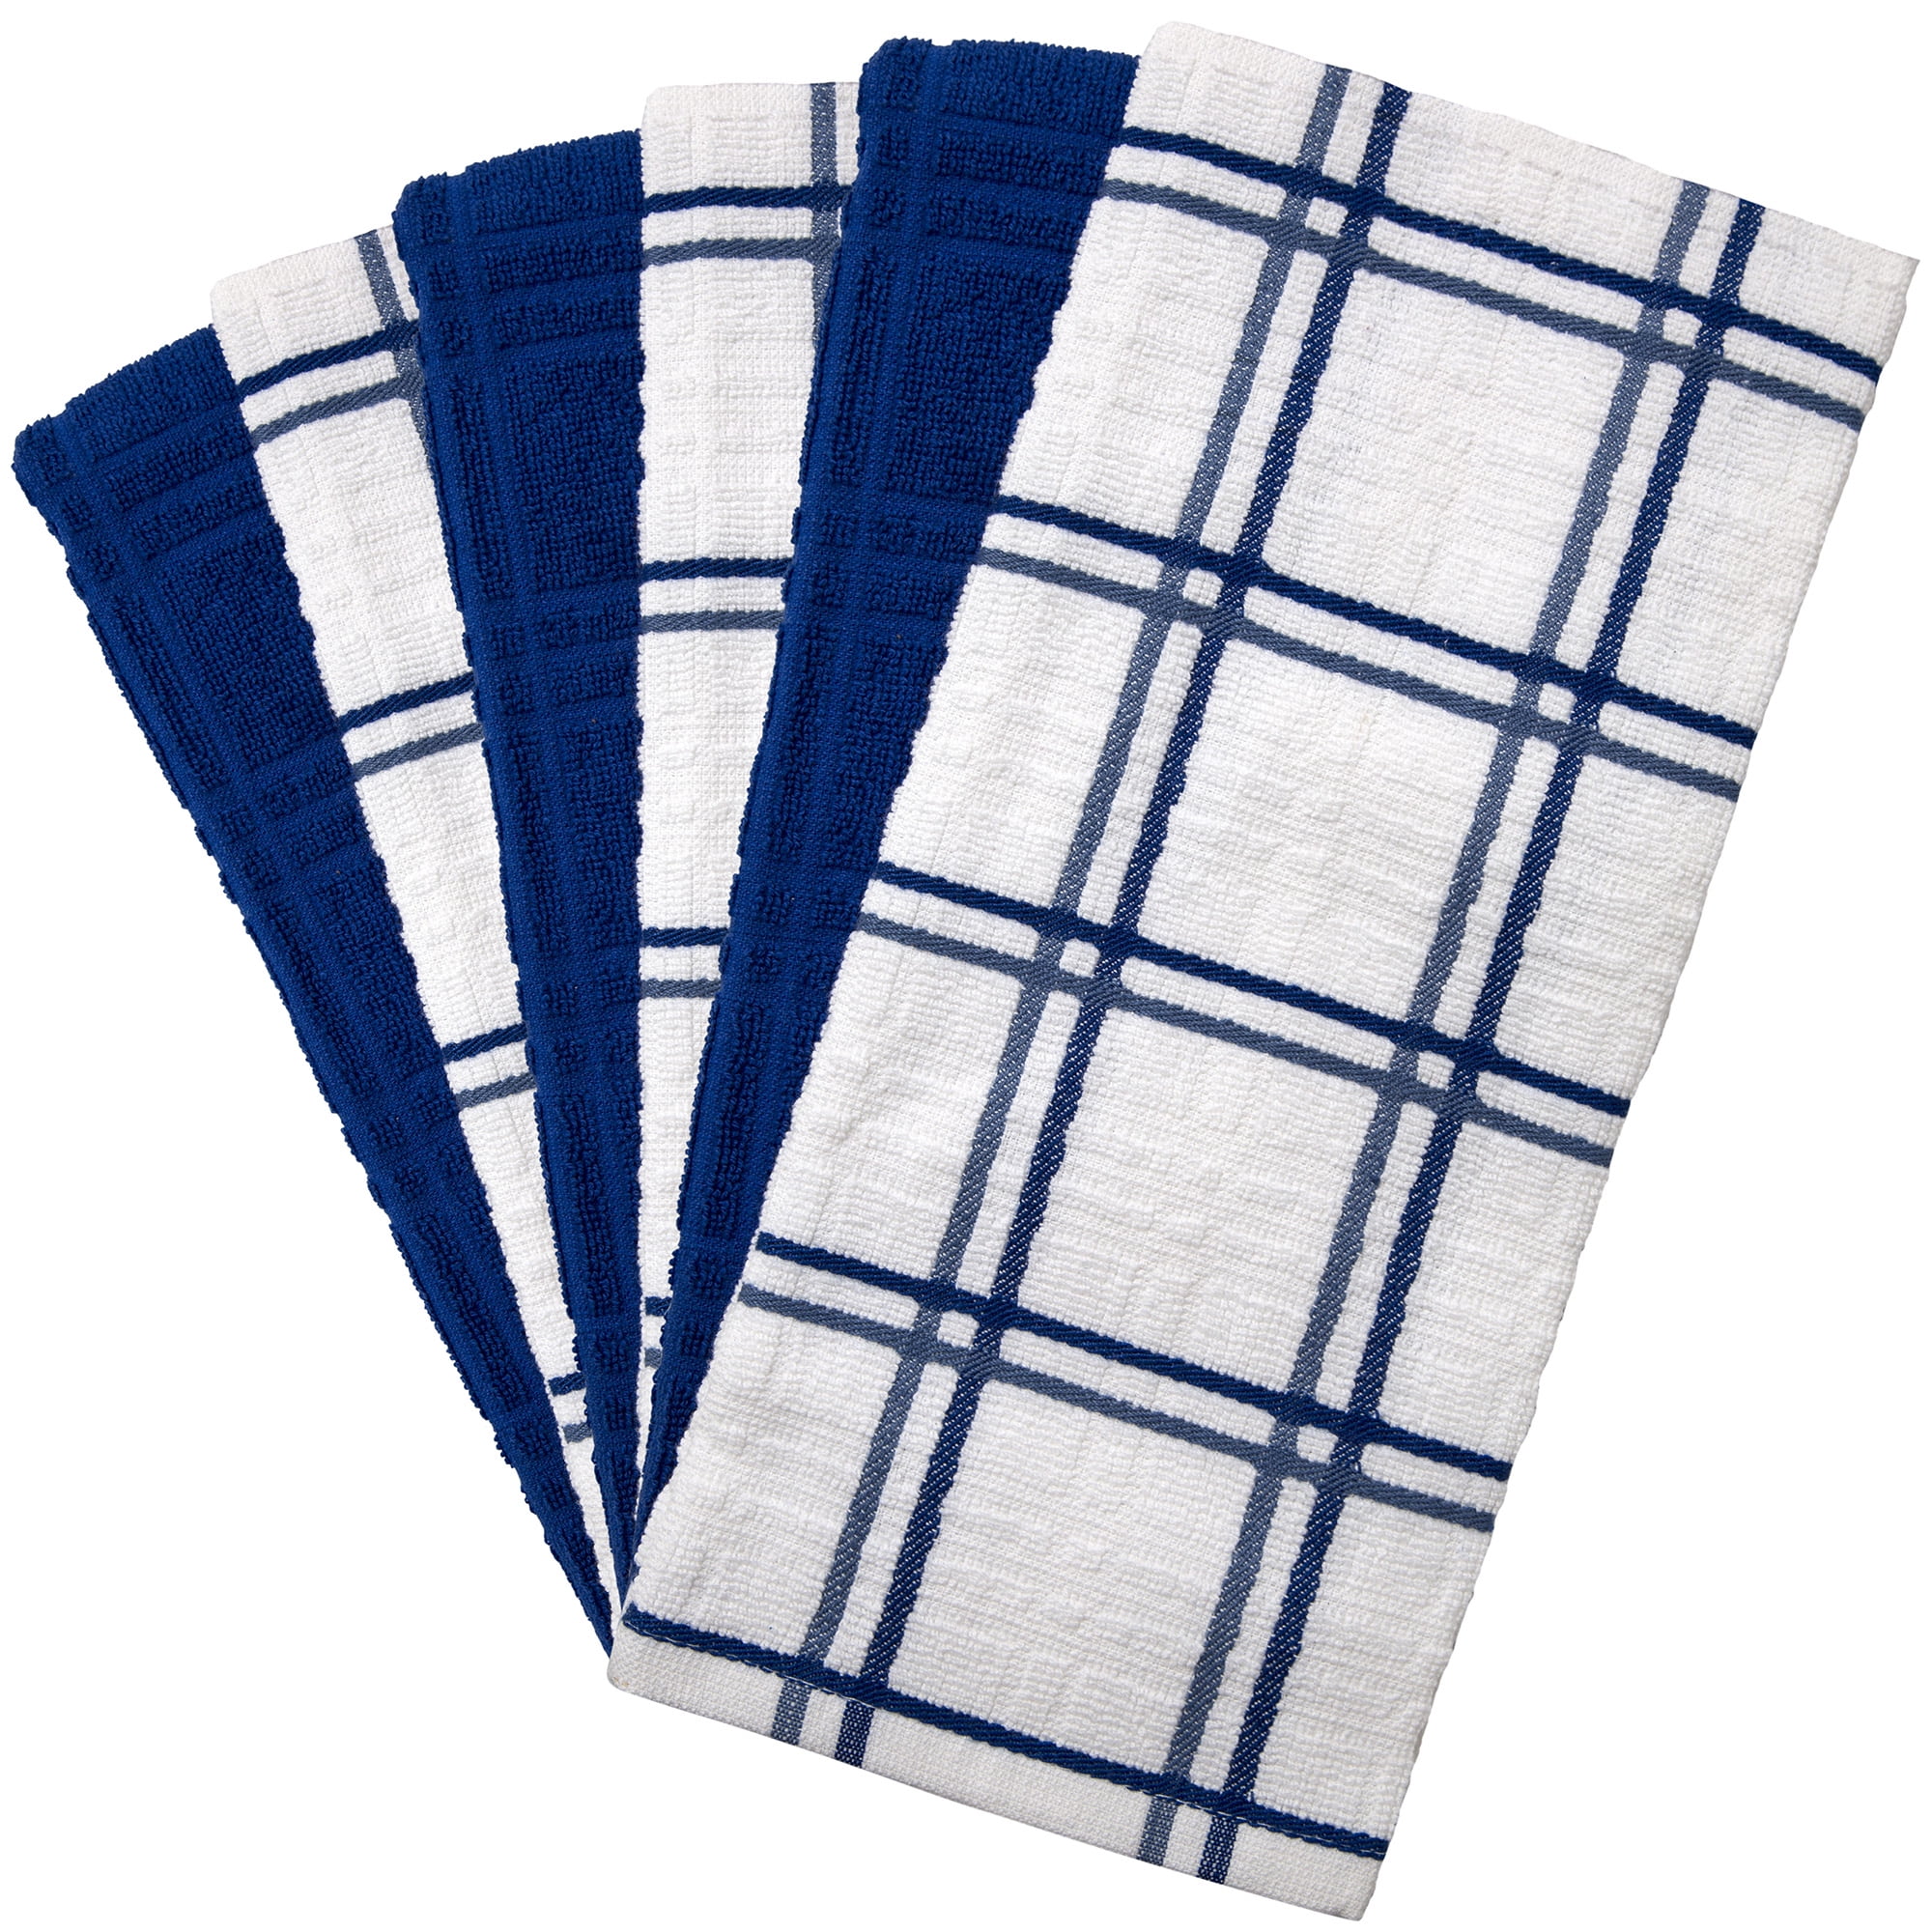 LANE LINEN Kitchen Towels Set - Pack of 6 Cotton Dish Towels for Drying  Dishes, 18”x 28”, Kitchen Hand Towels, Tea Towels, Premium Dish Towels for